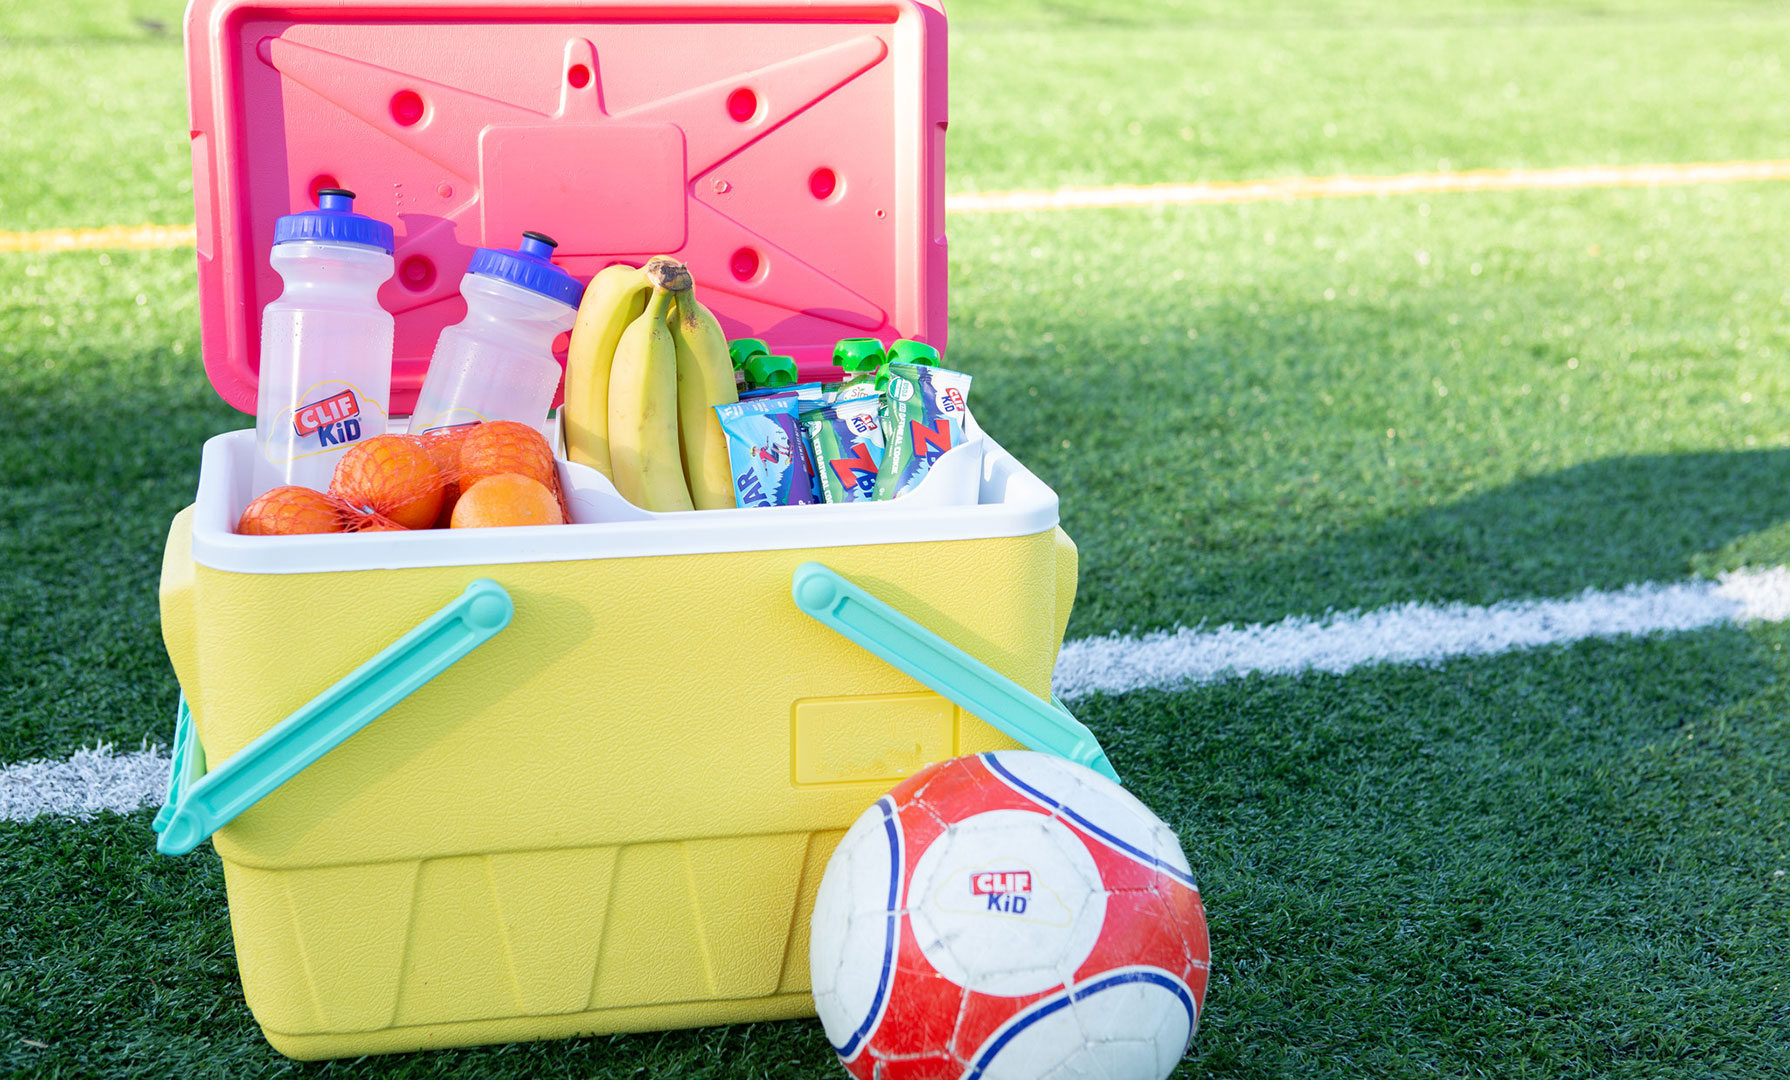 15 Soccer Snack Ideas for the Next Big Game Clif Bar